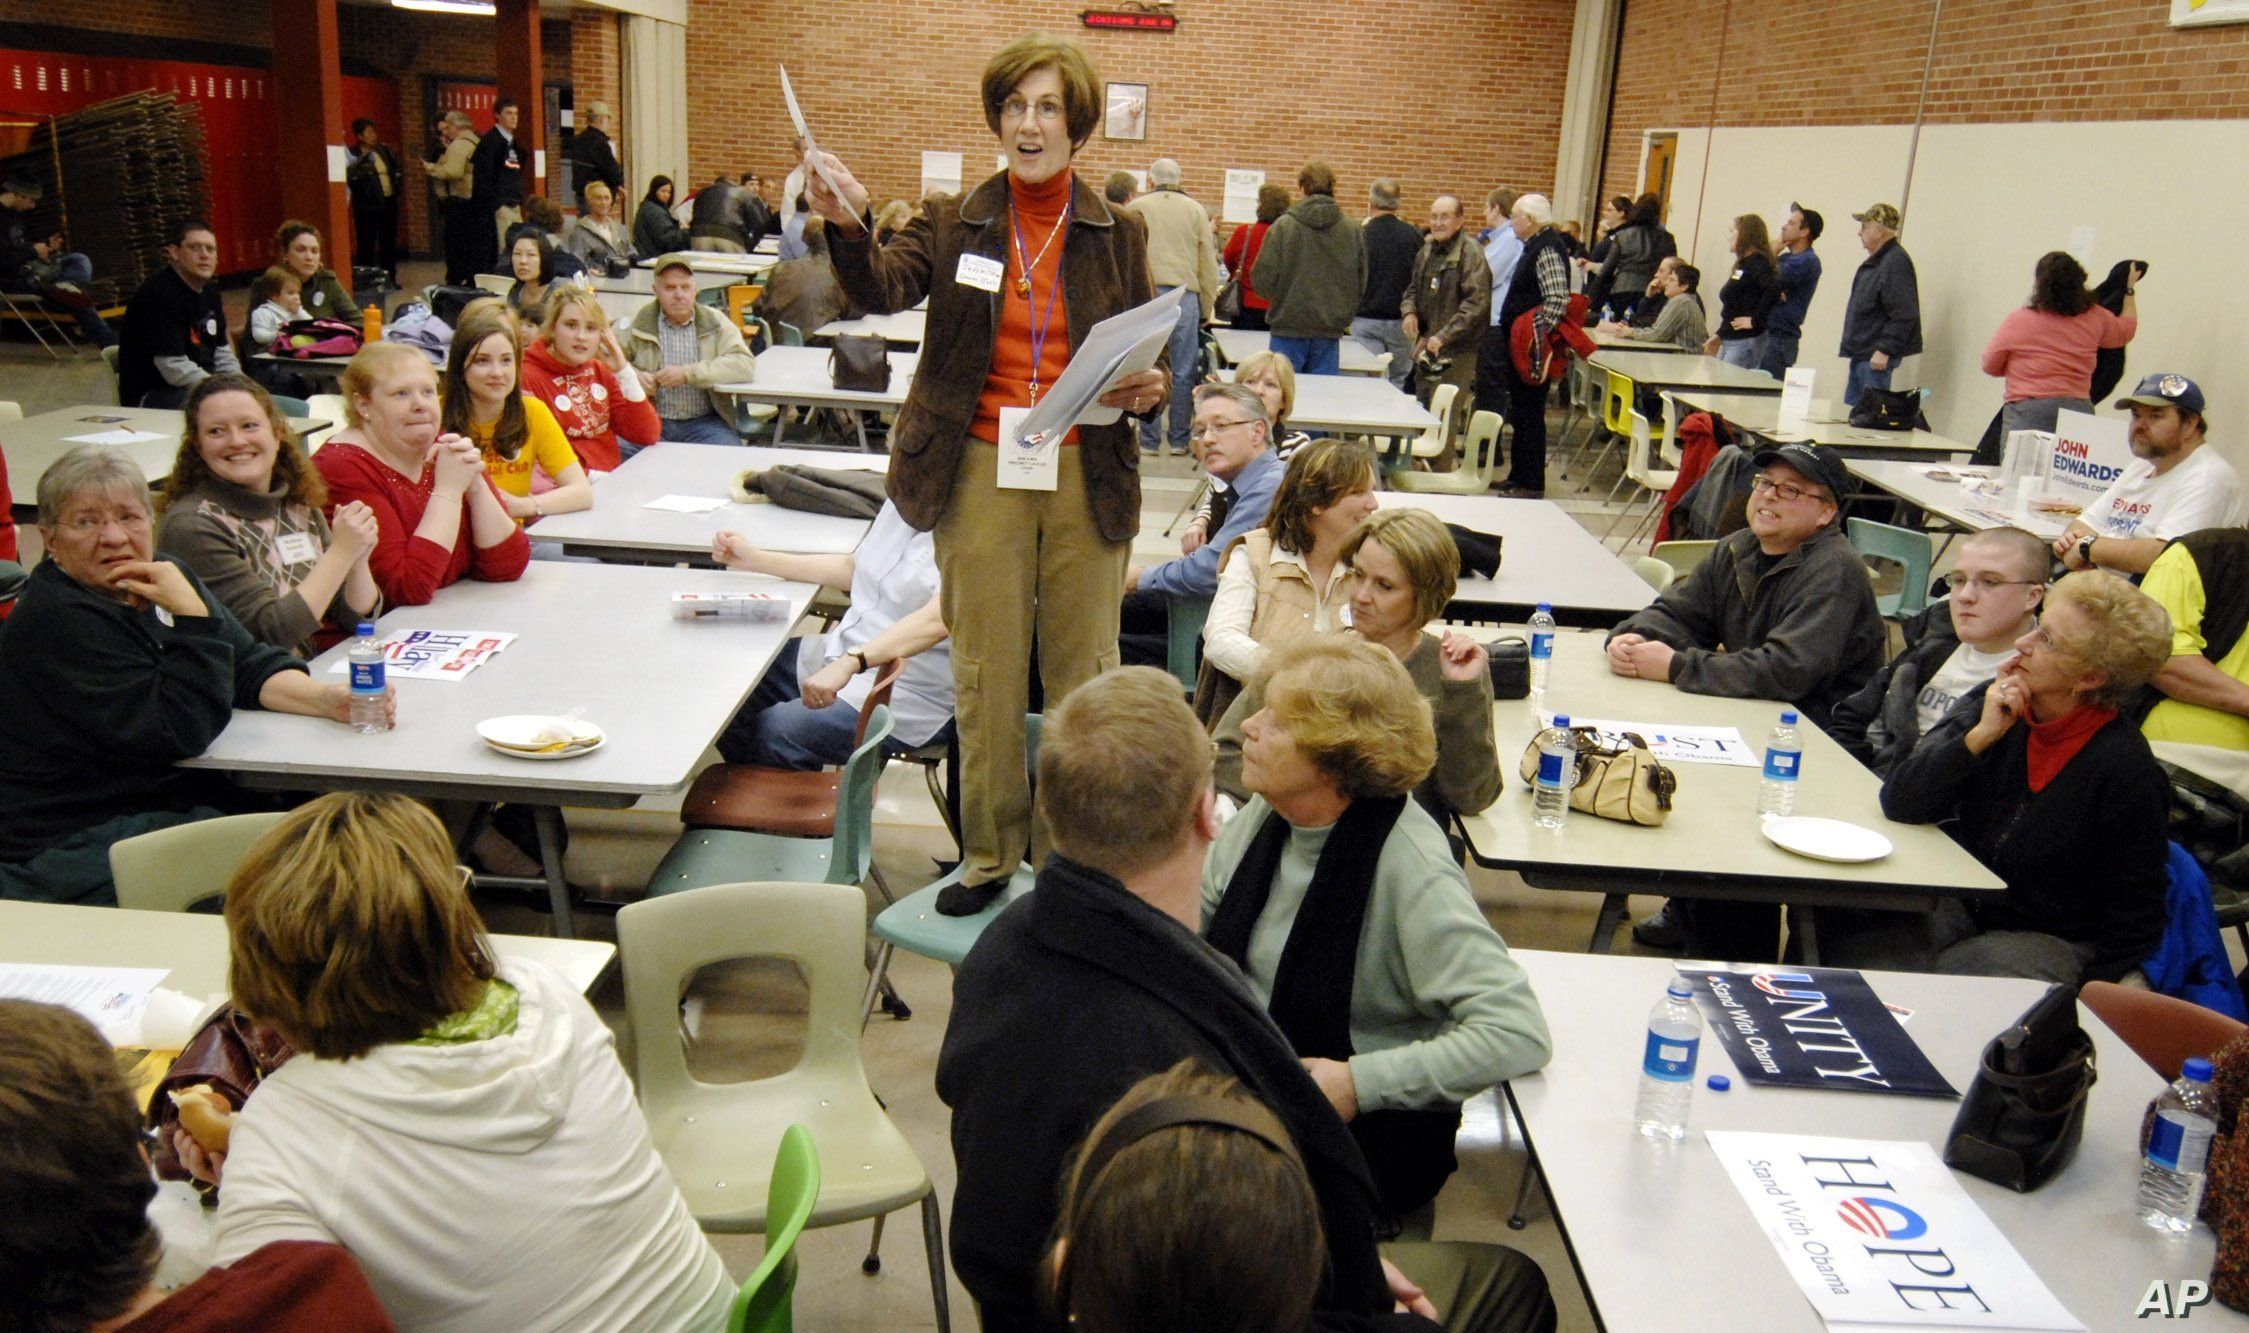 FILE - Precinct Chairwoman Judy Wittkop explains the rules during a caucus in Le Mars, Iowa, Jan. 3, 2008.